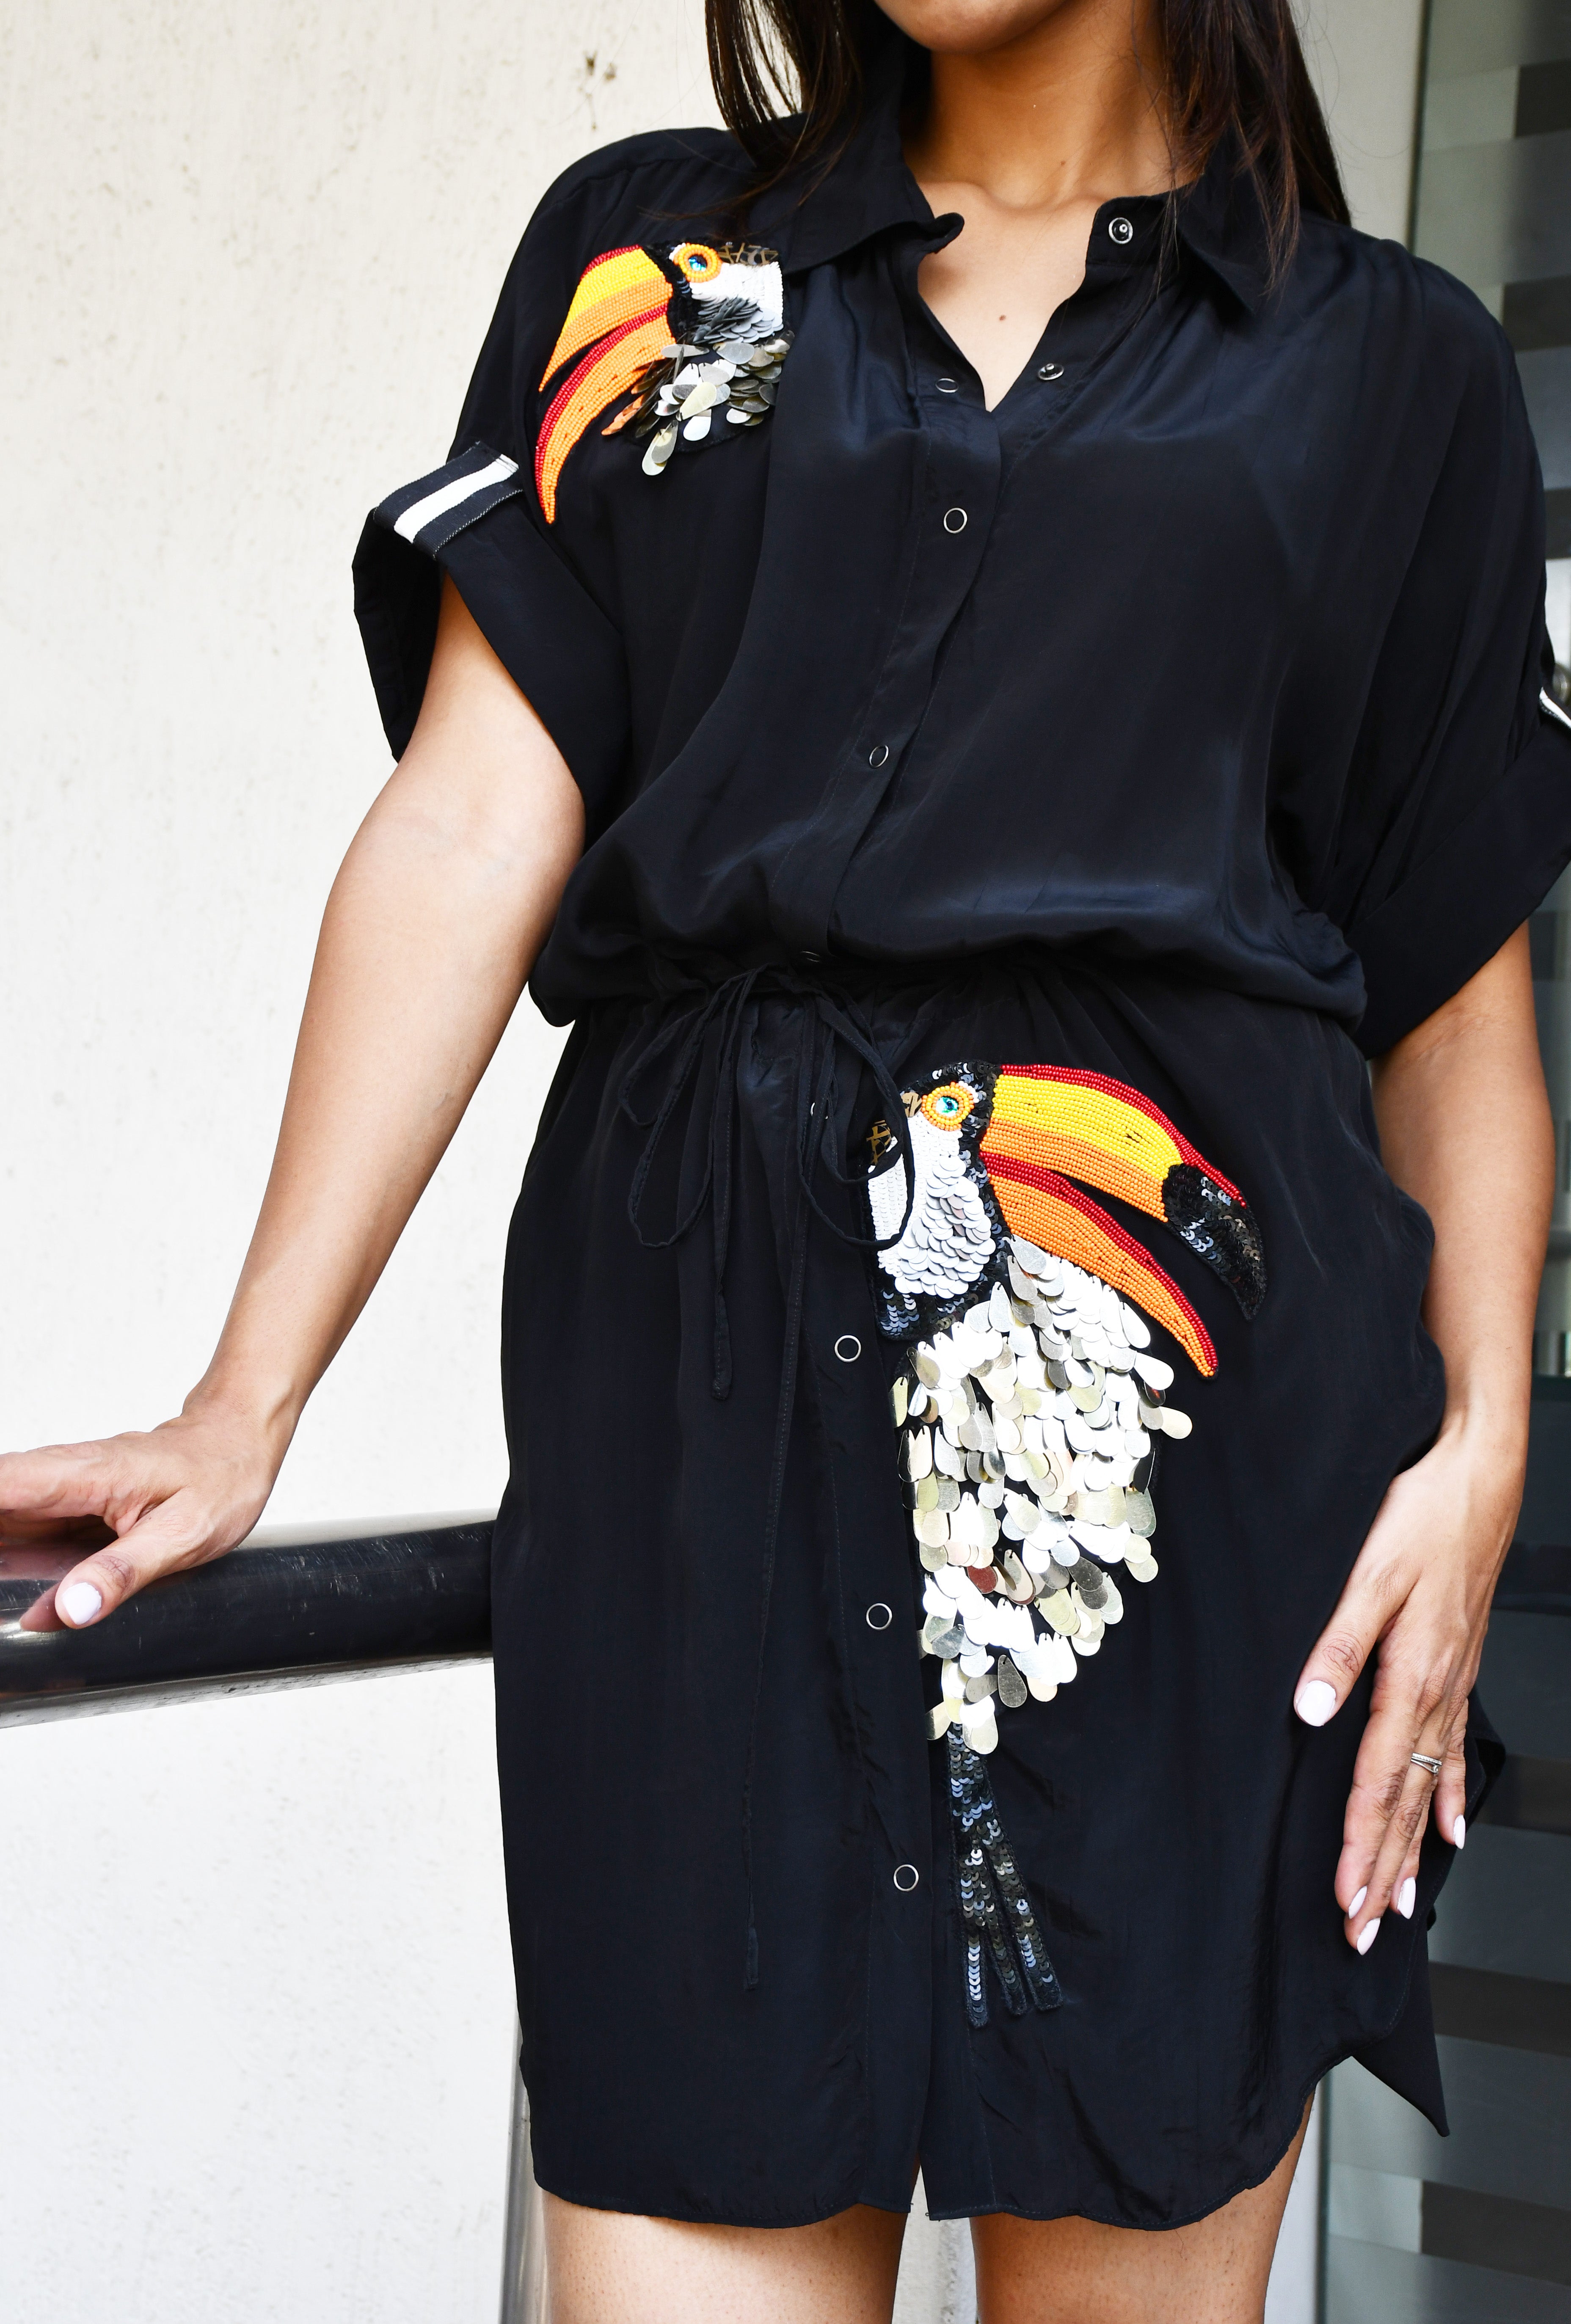 BLACK CREPE DRESS WITH TOUCAN BIRD EMBROIDERY